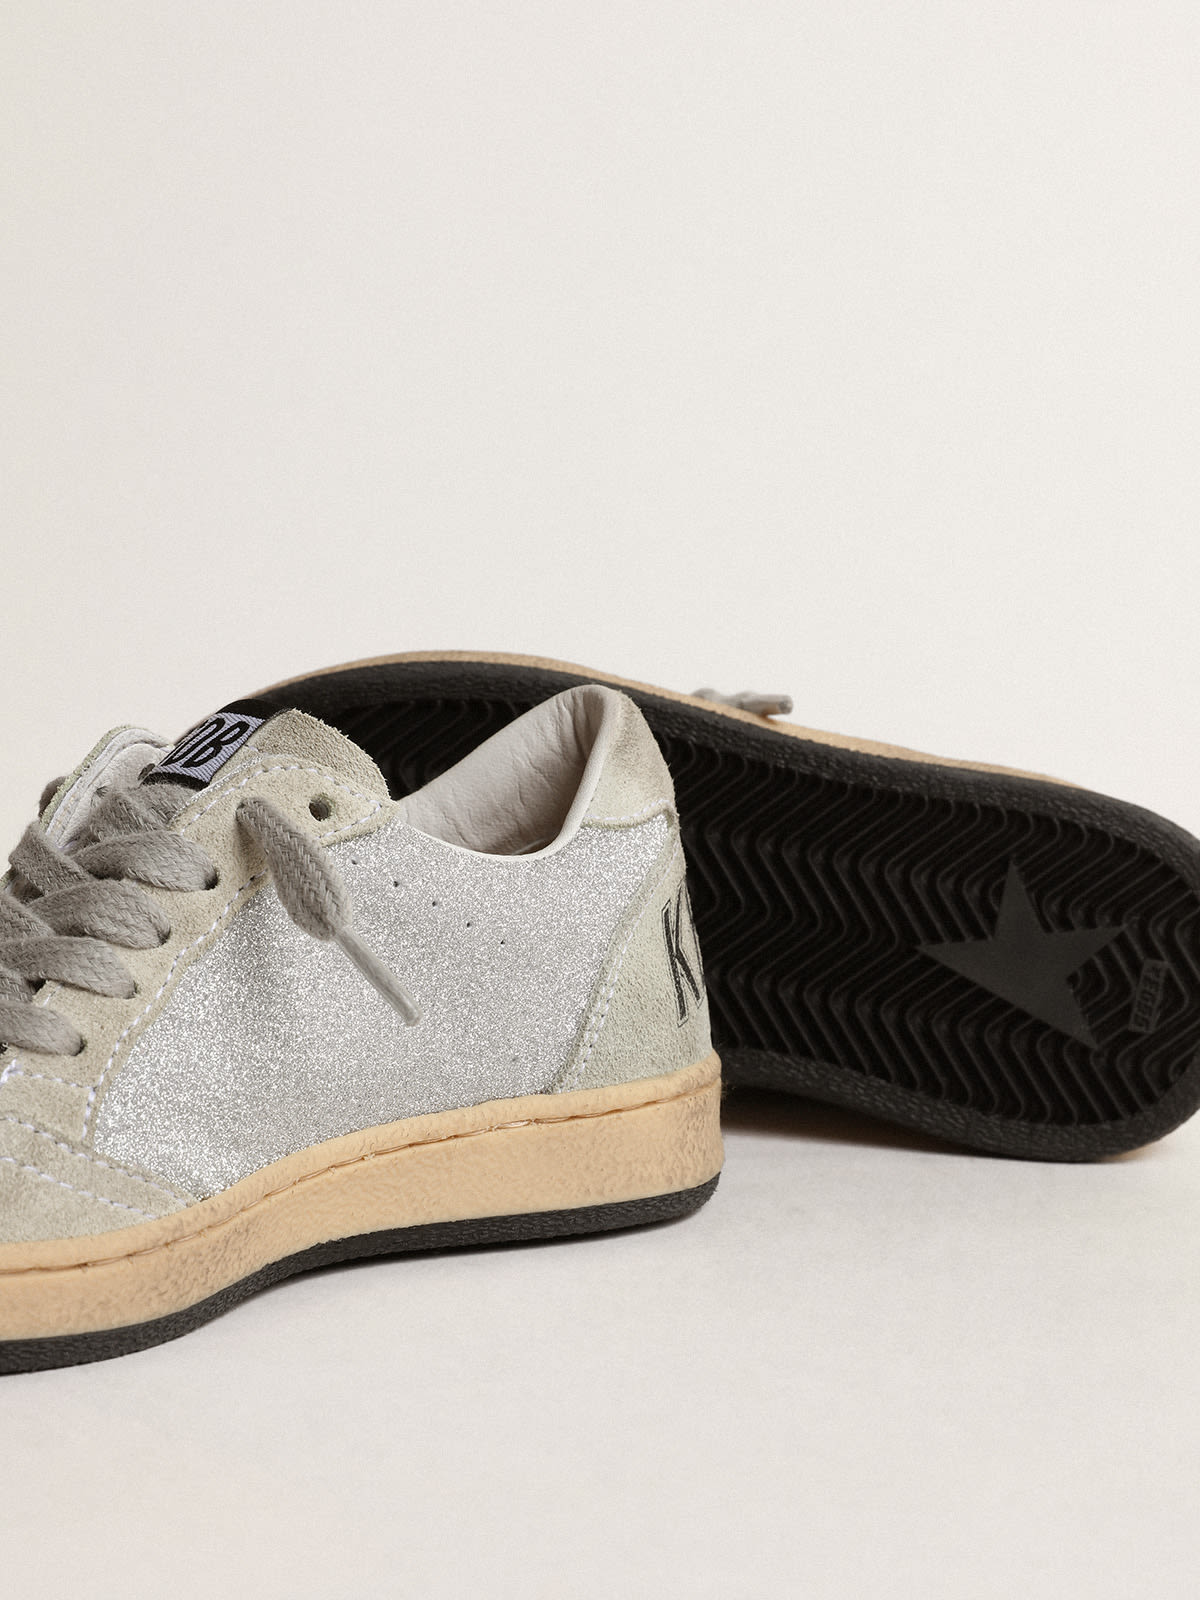 Golden Goose - Ball Star Junior in glitter with ice-gray suede inserts in 